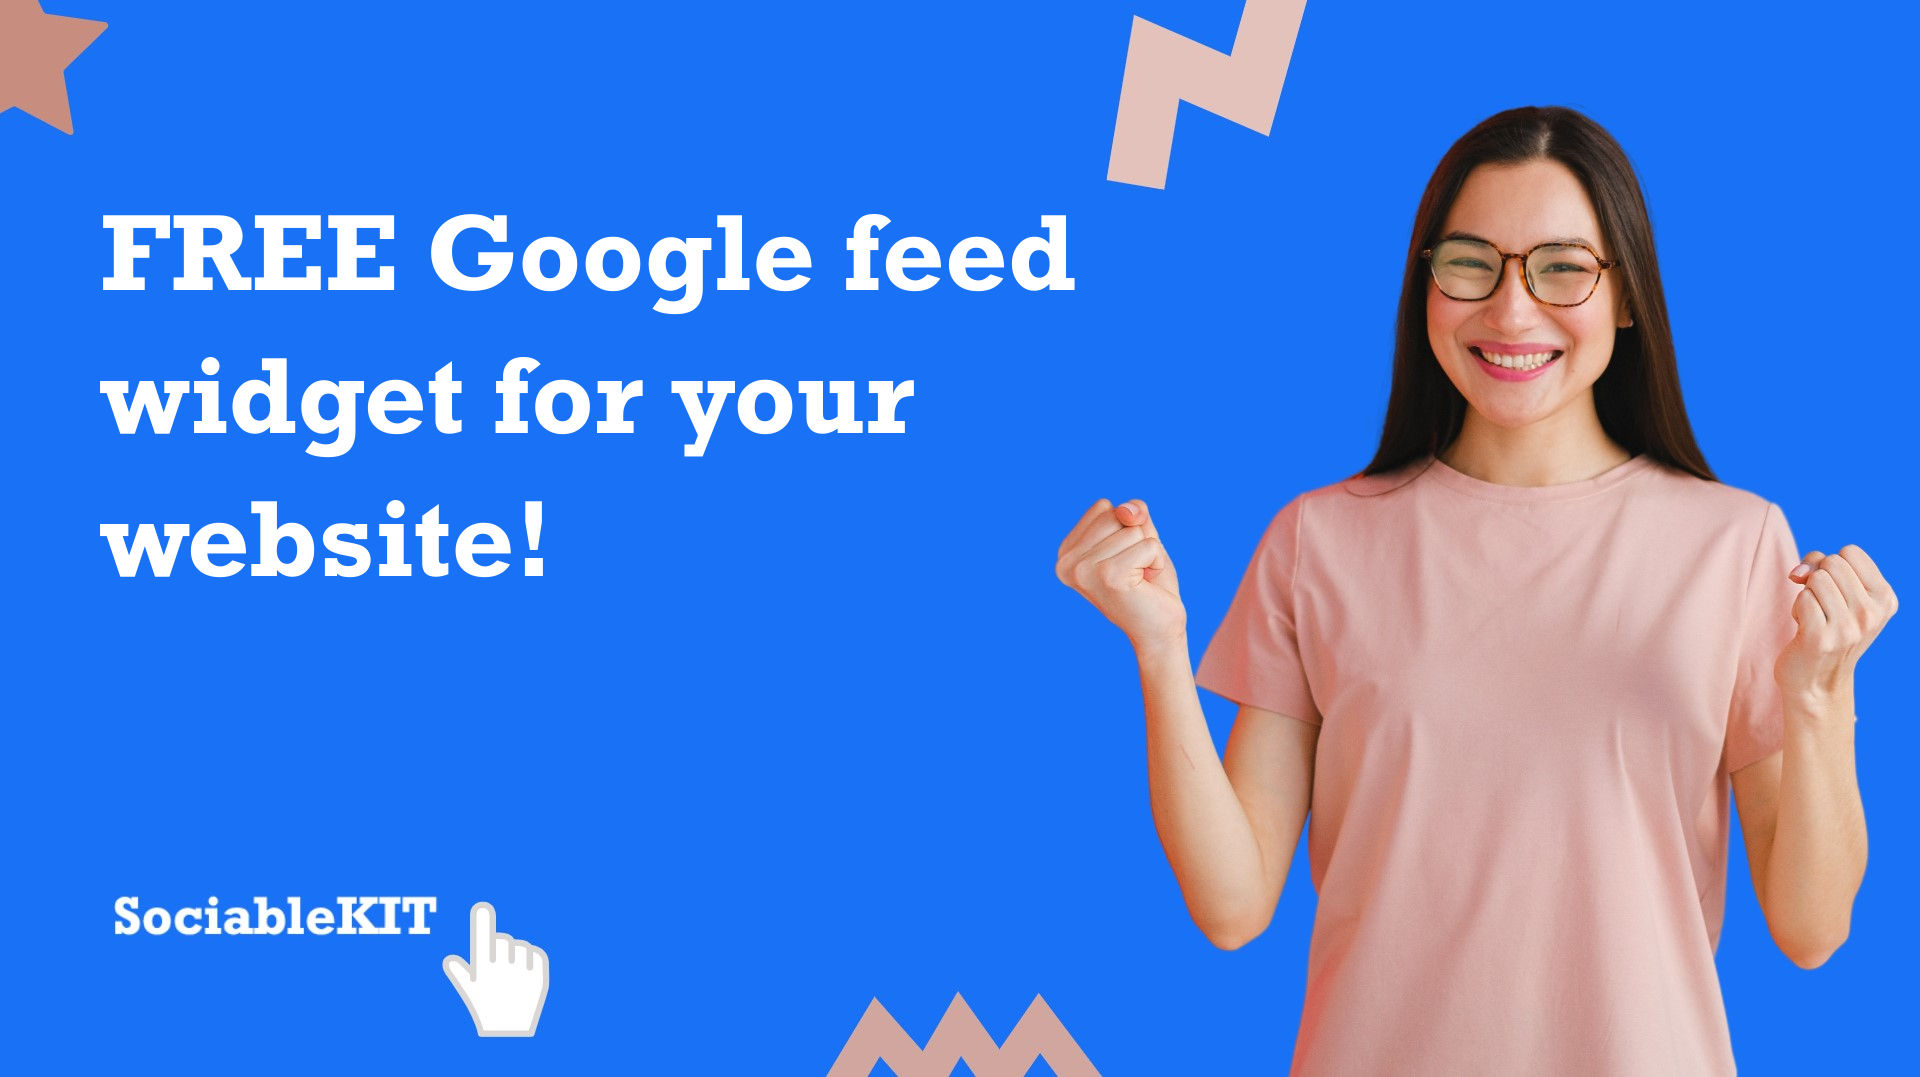 Free Google feed widget for your website